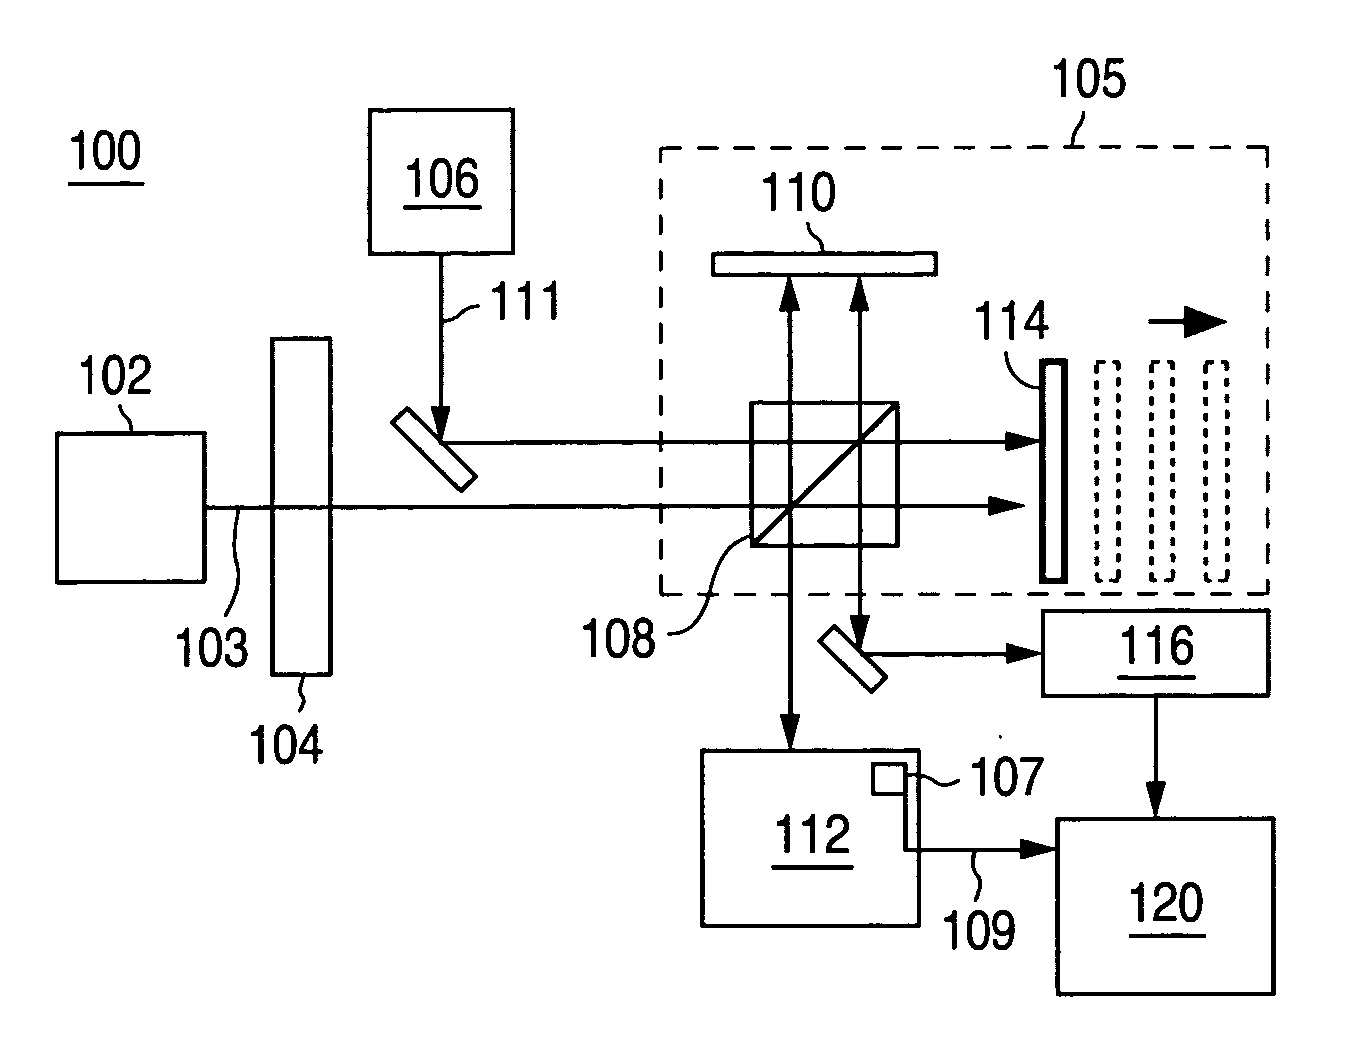 System and method for interferometric laser photoacoustic spectroscopy